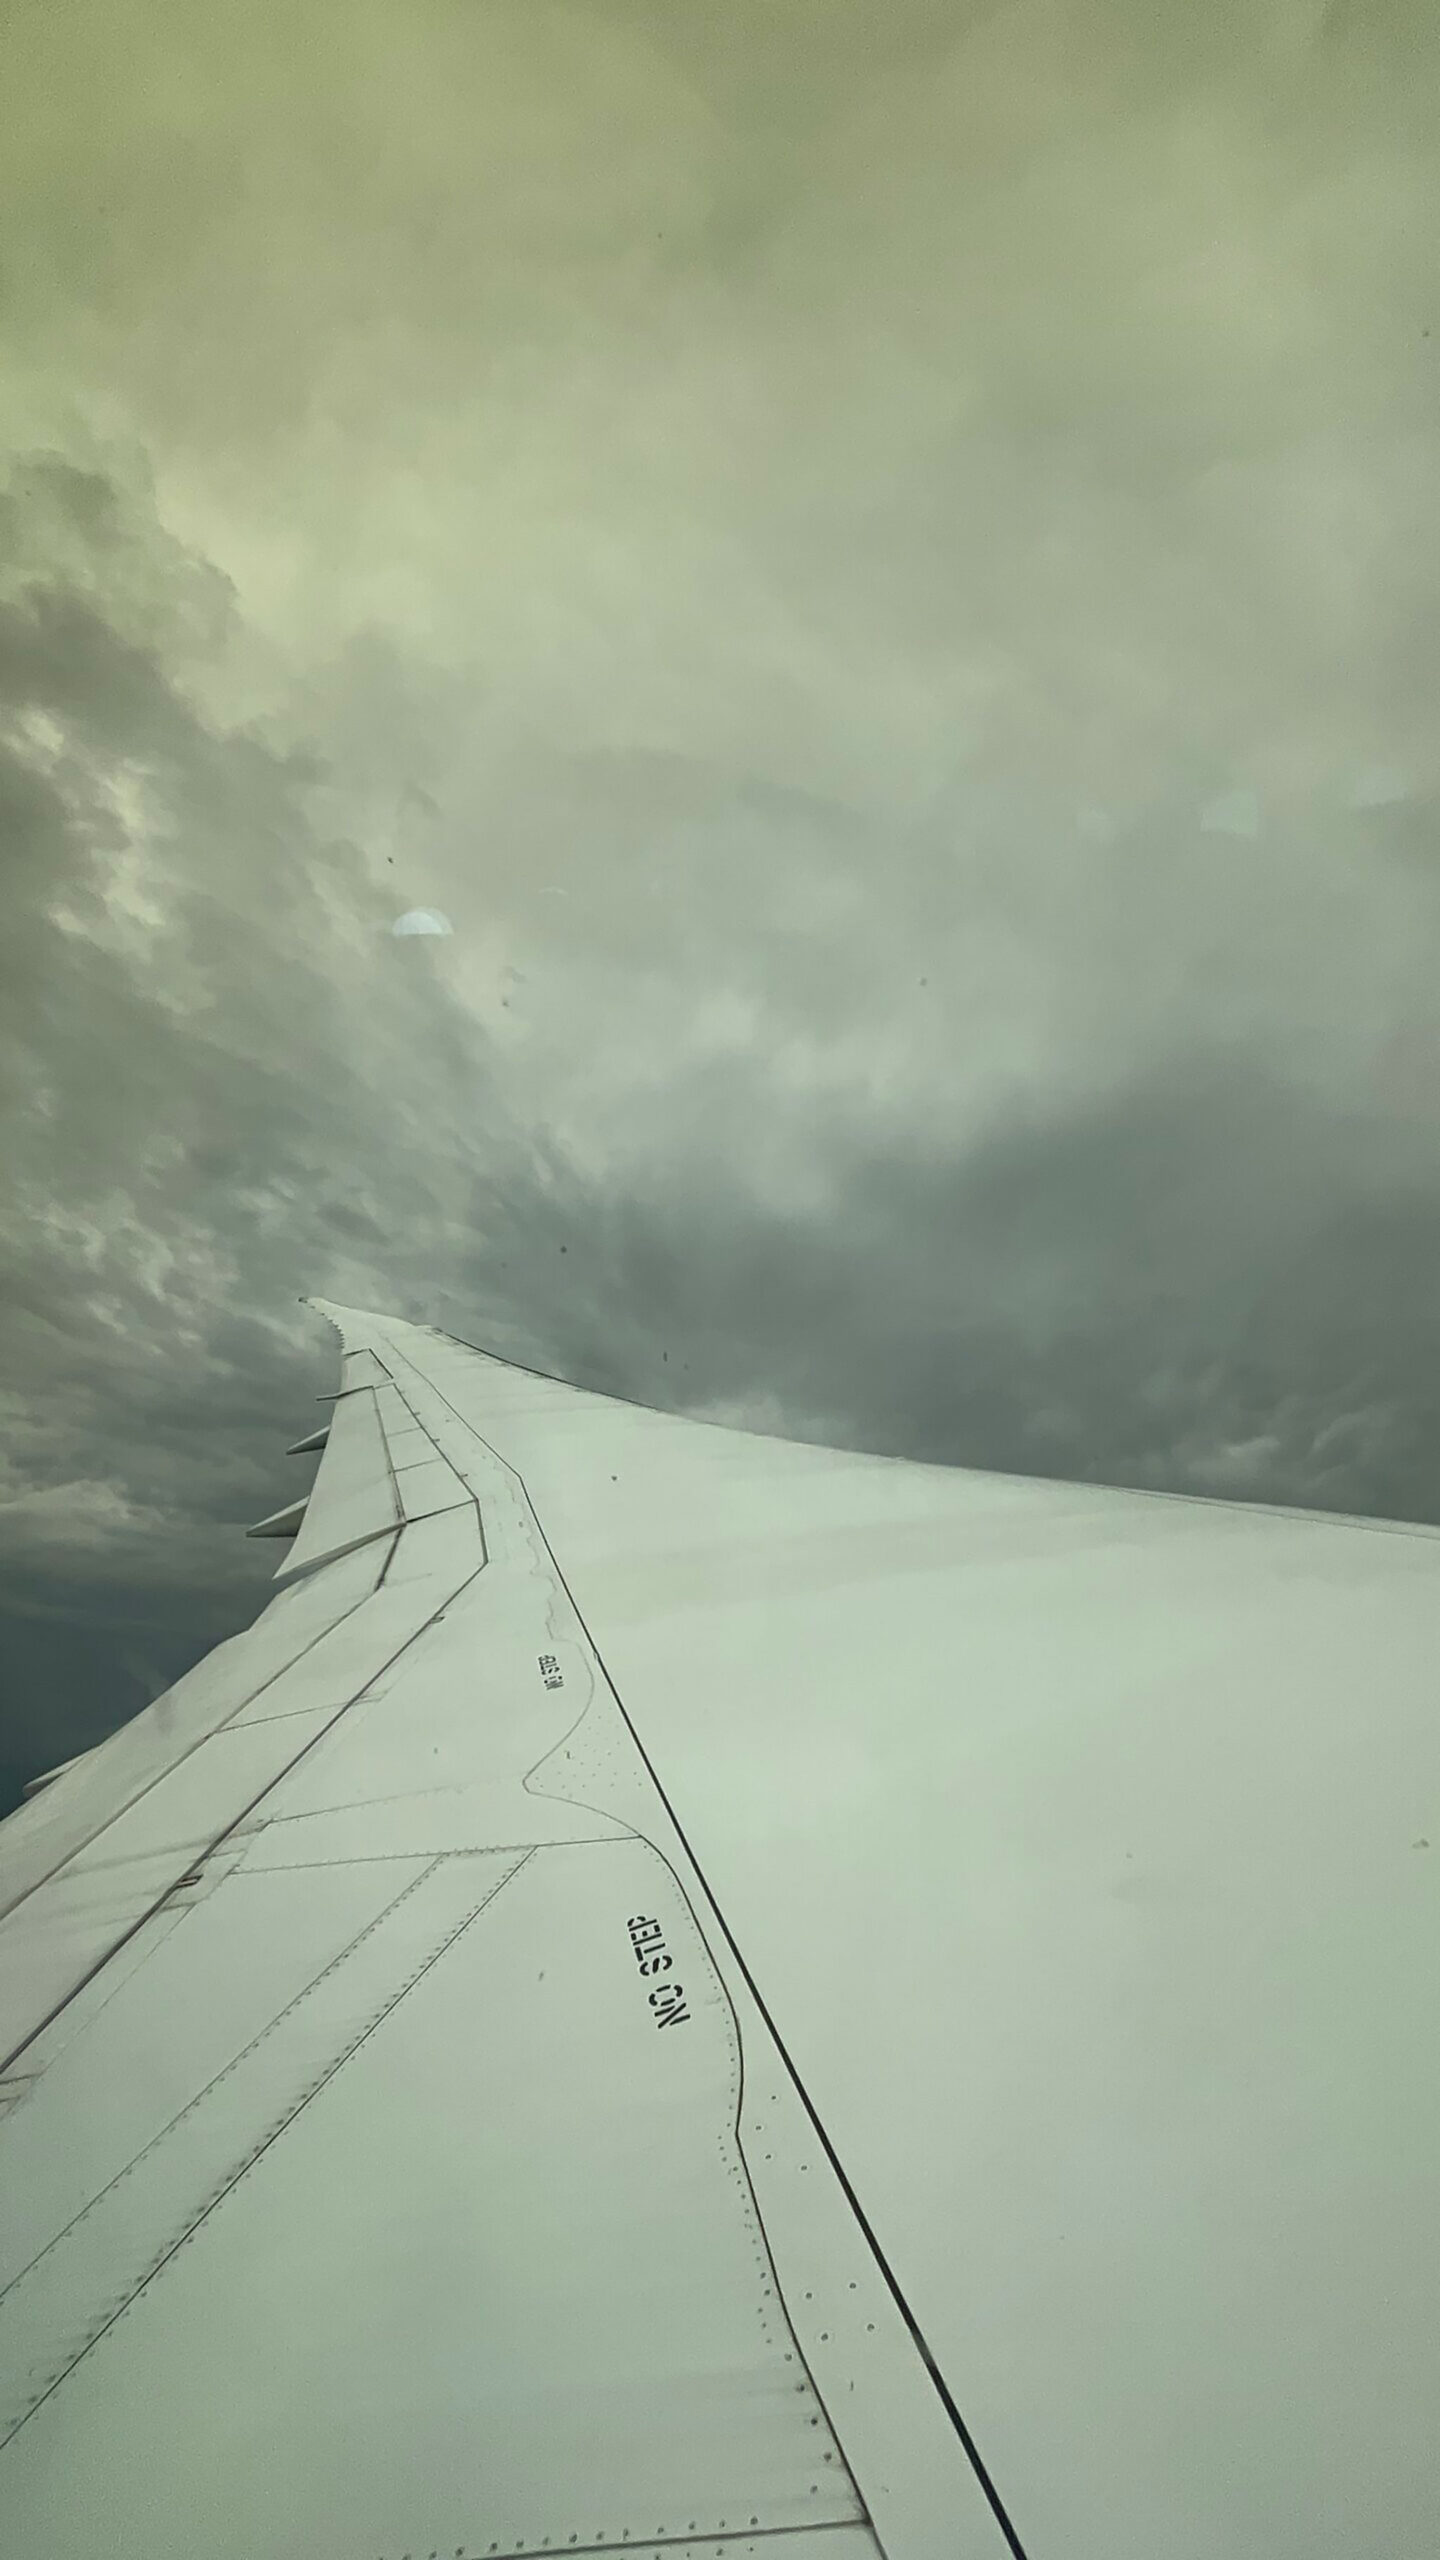 Picture of a Plane Wing in the air